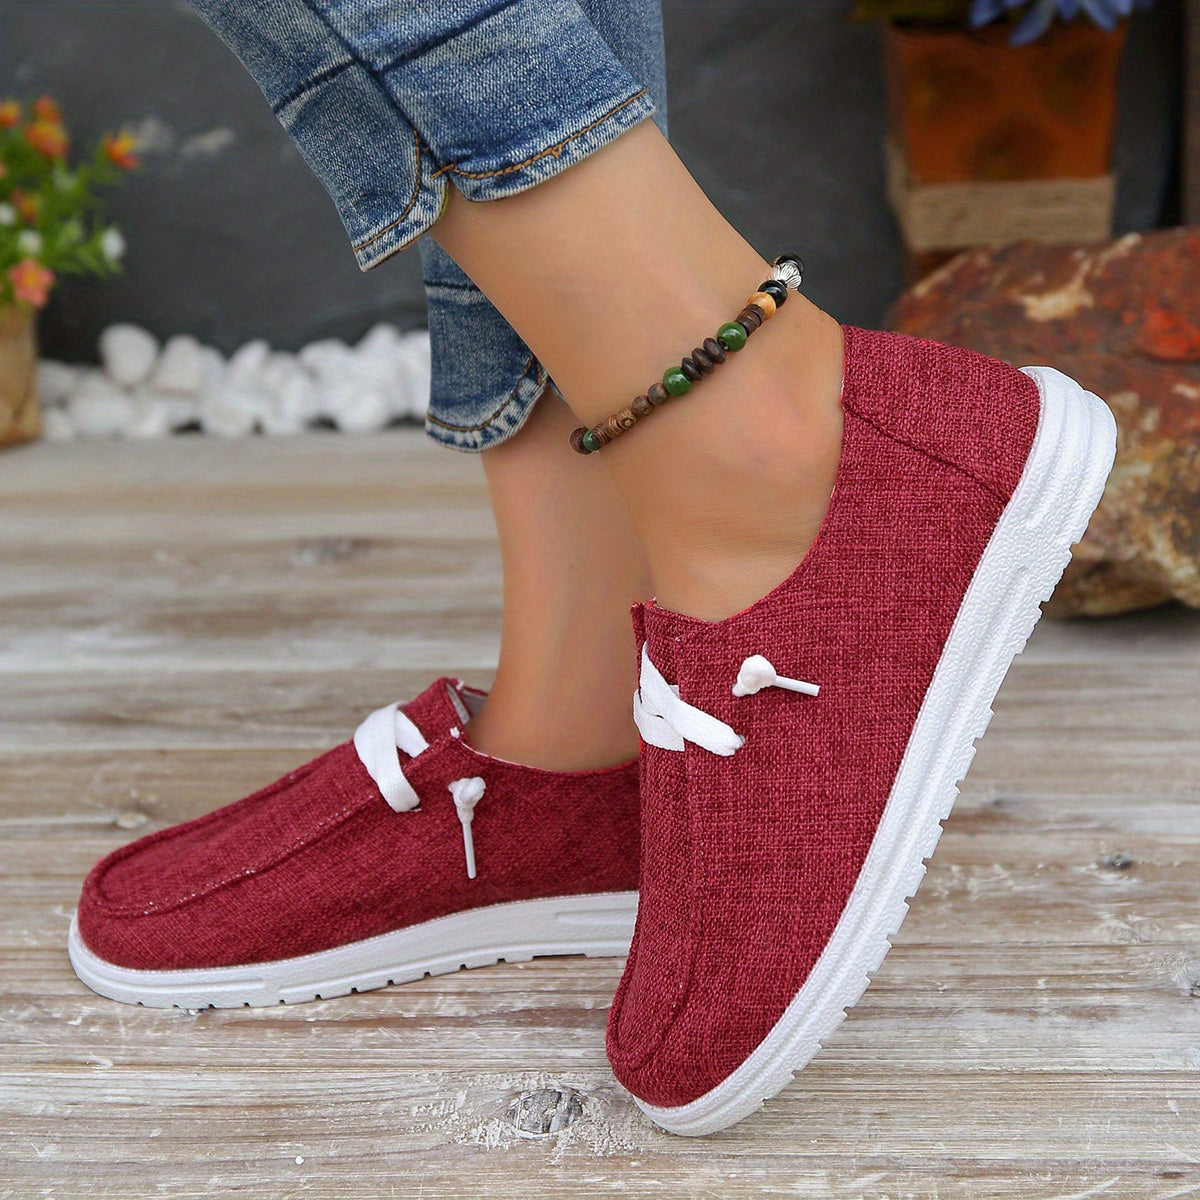 Solid Color Canvas Shoes, Casual Lace Up Walking Sneakers